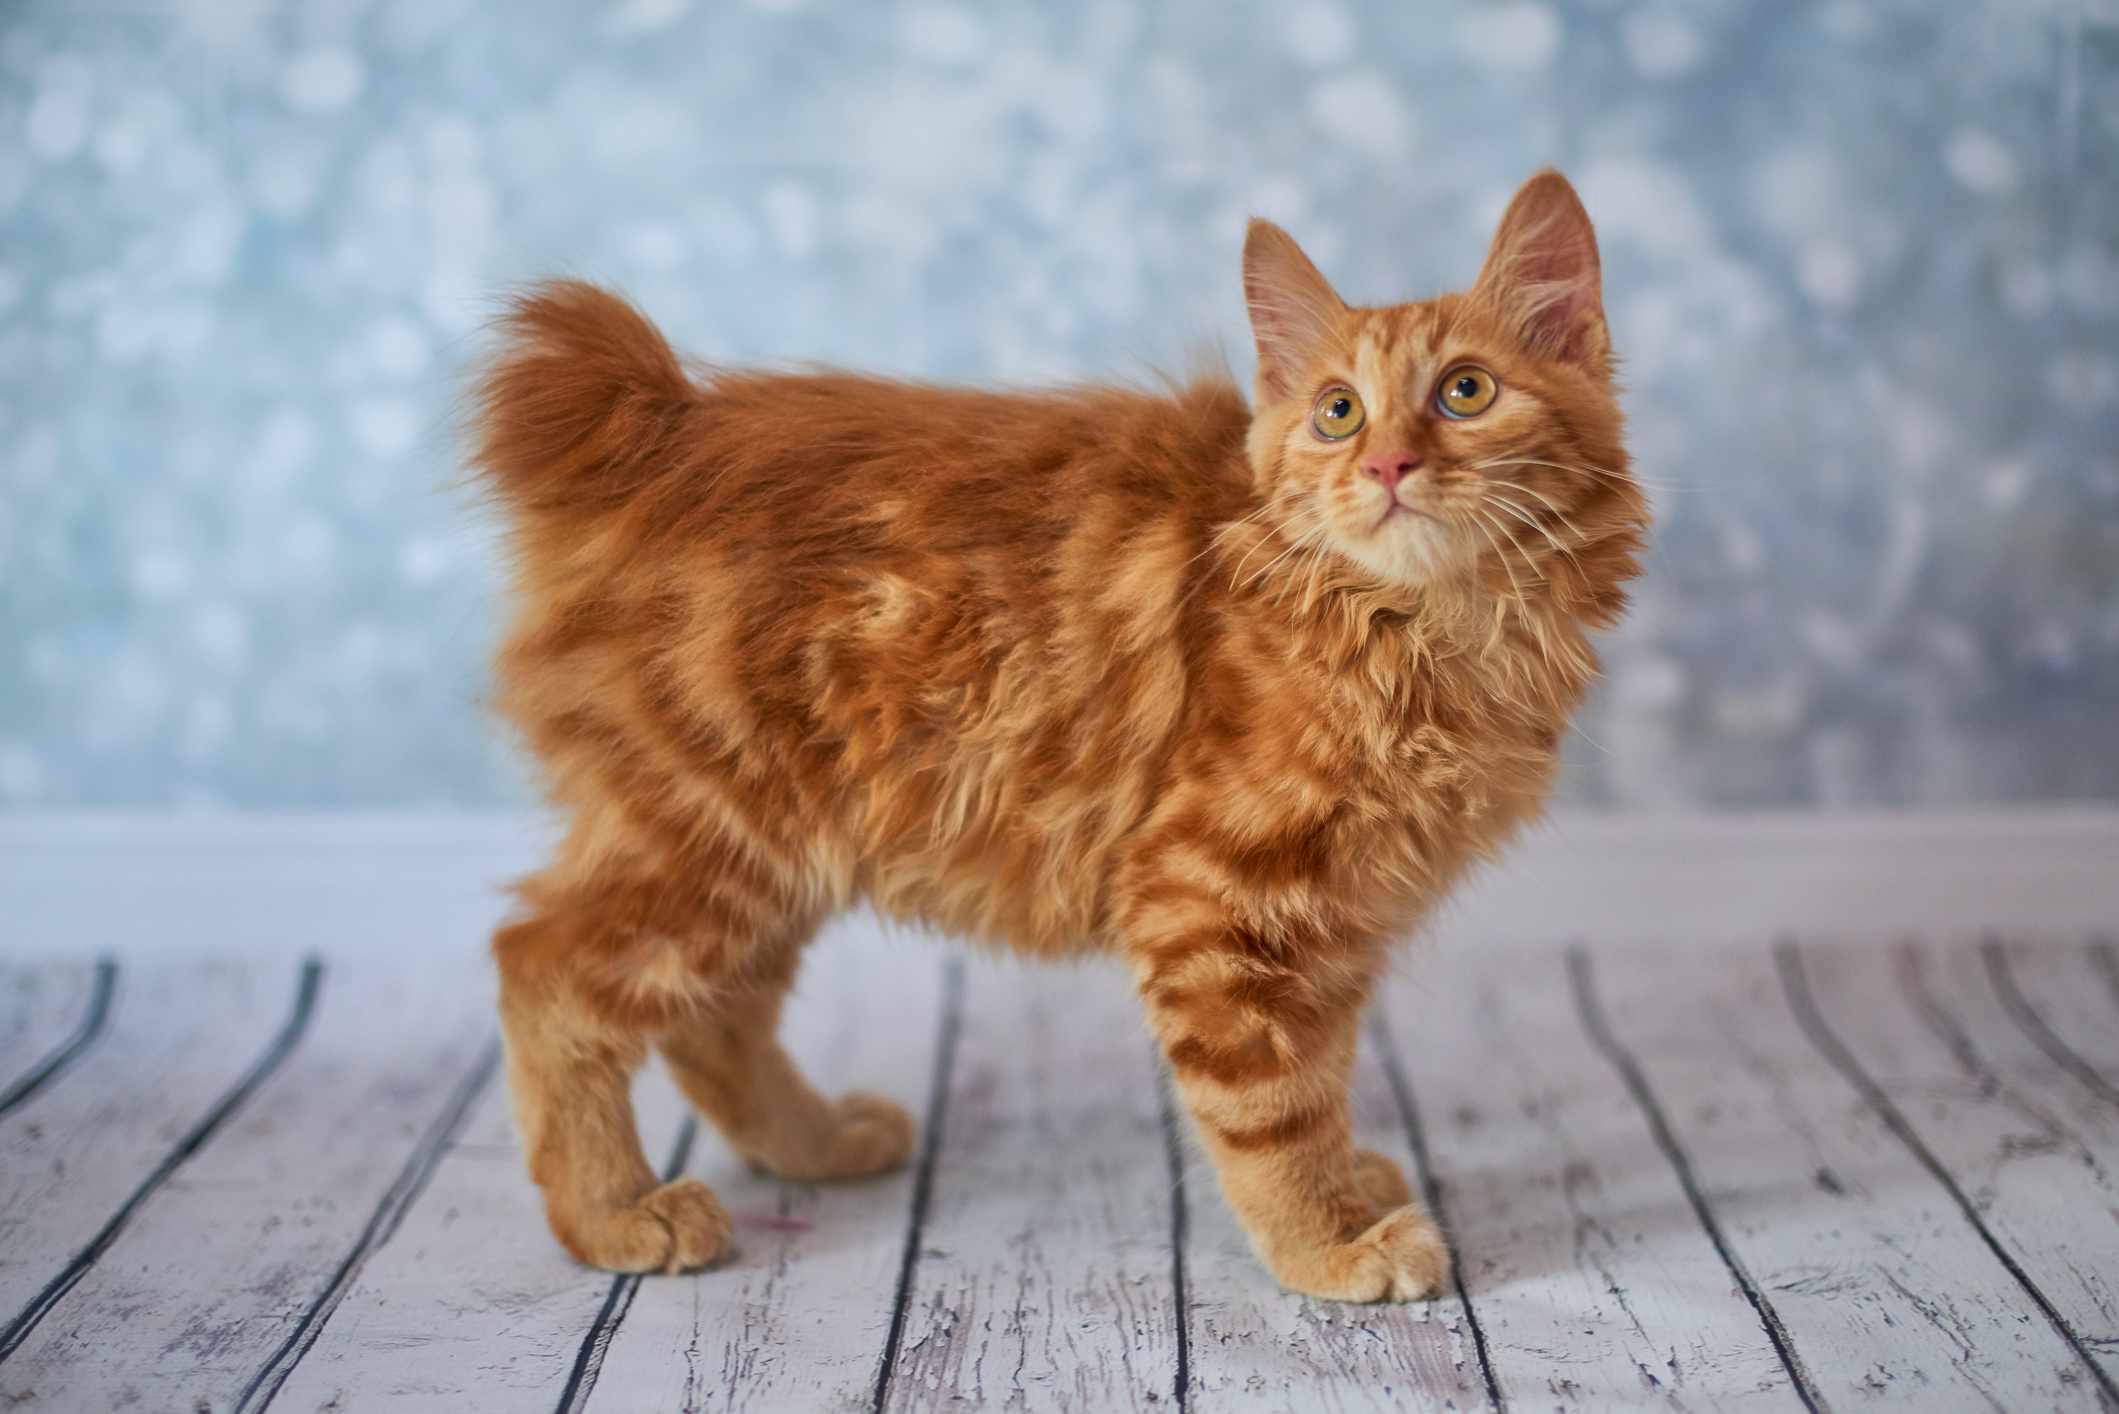 An orange cat with a short, bobbed tail looking above the camera.